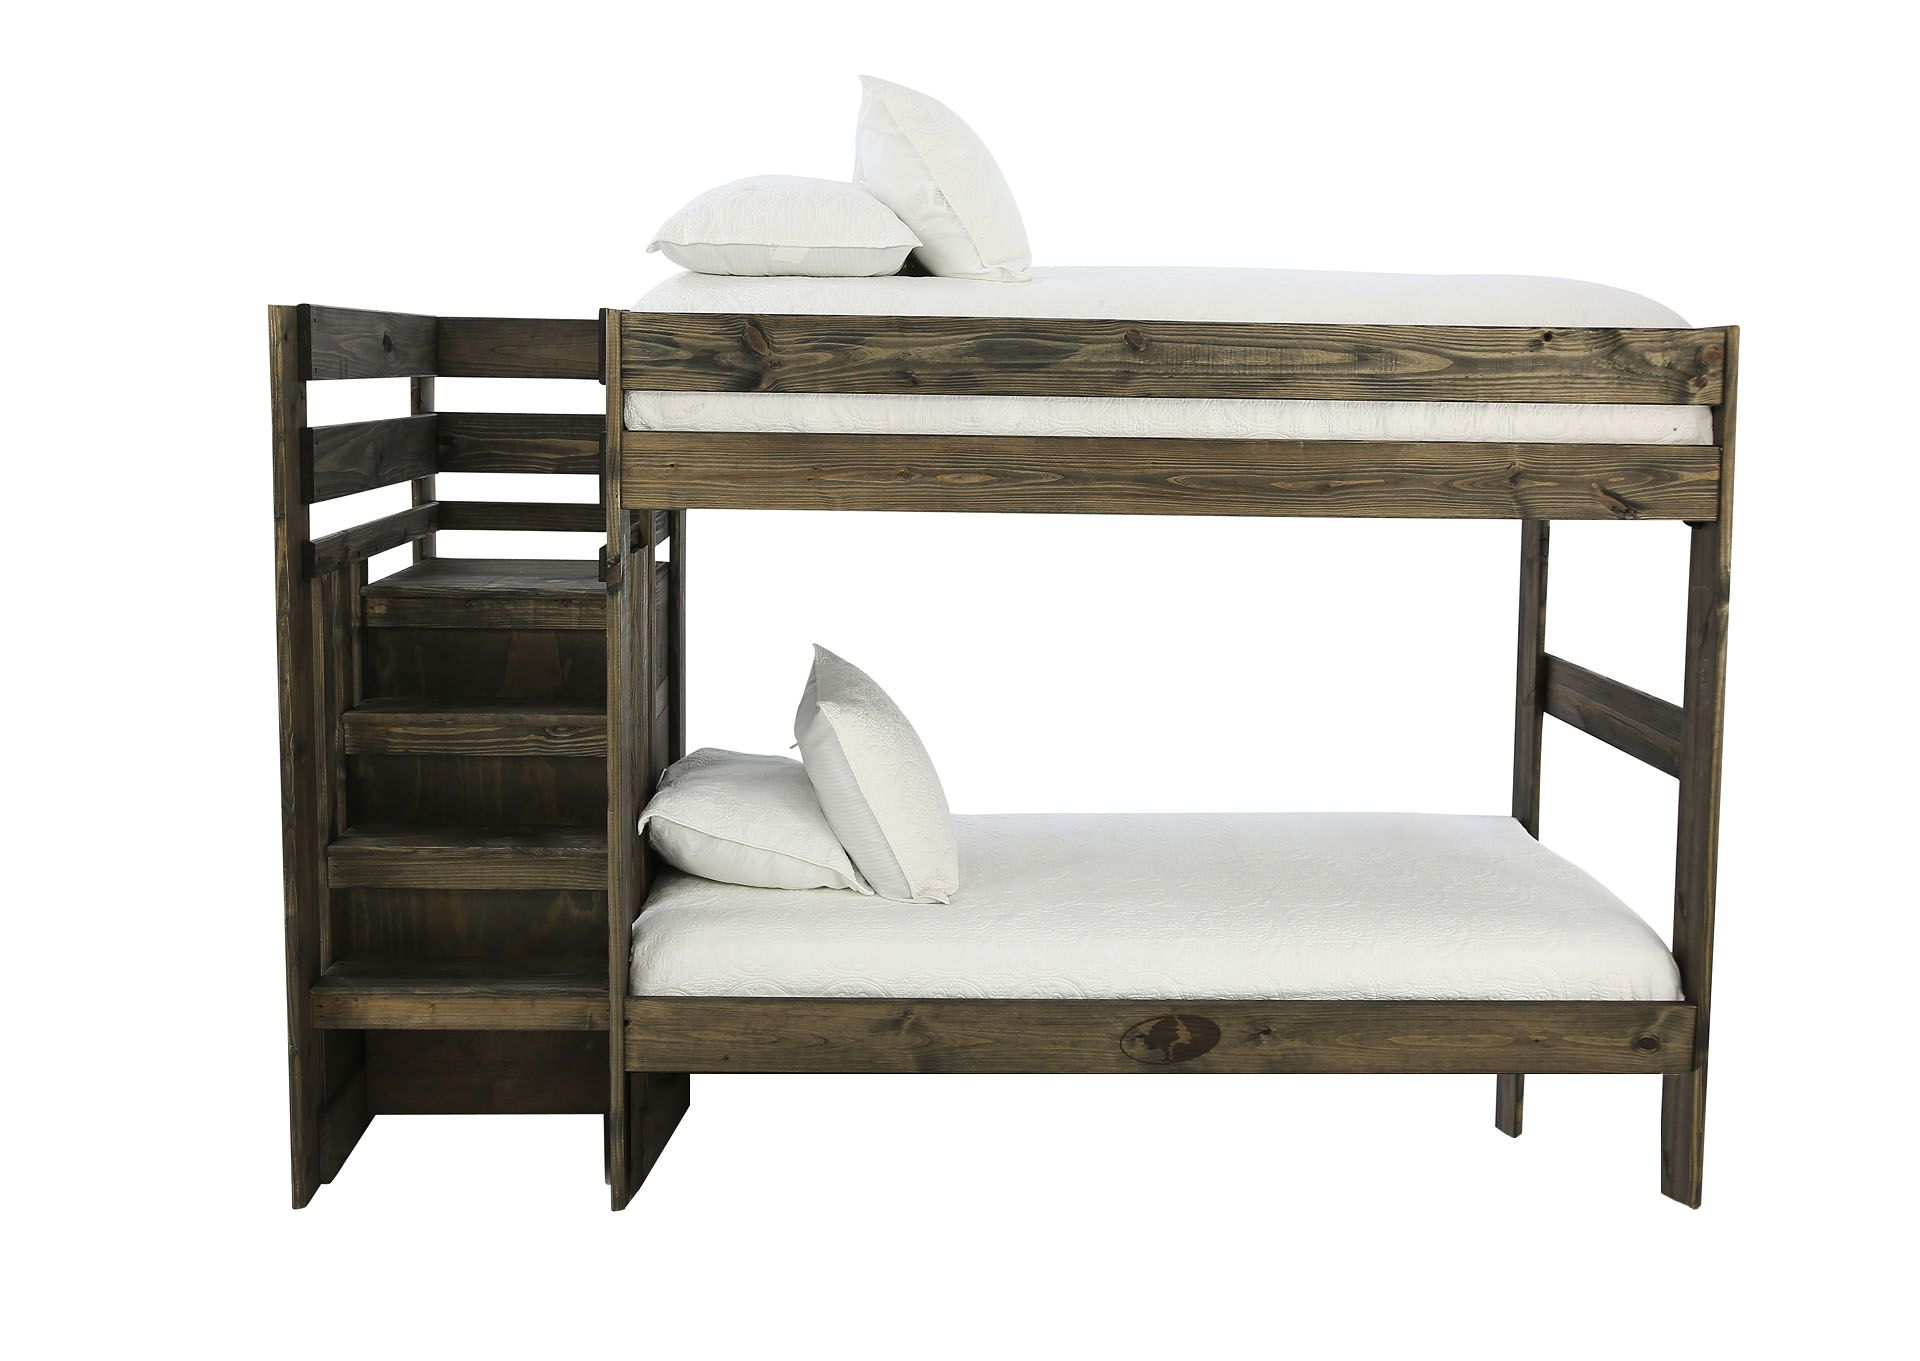 Silas Mossy Oak Twin Stair Bunkbed, Adventure Bunk Beds